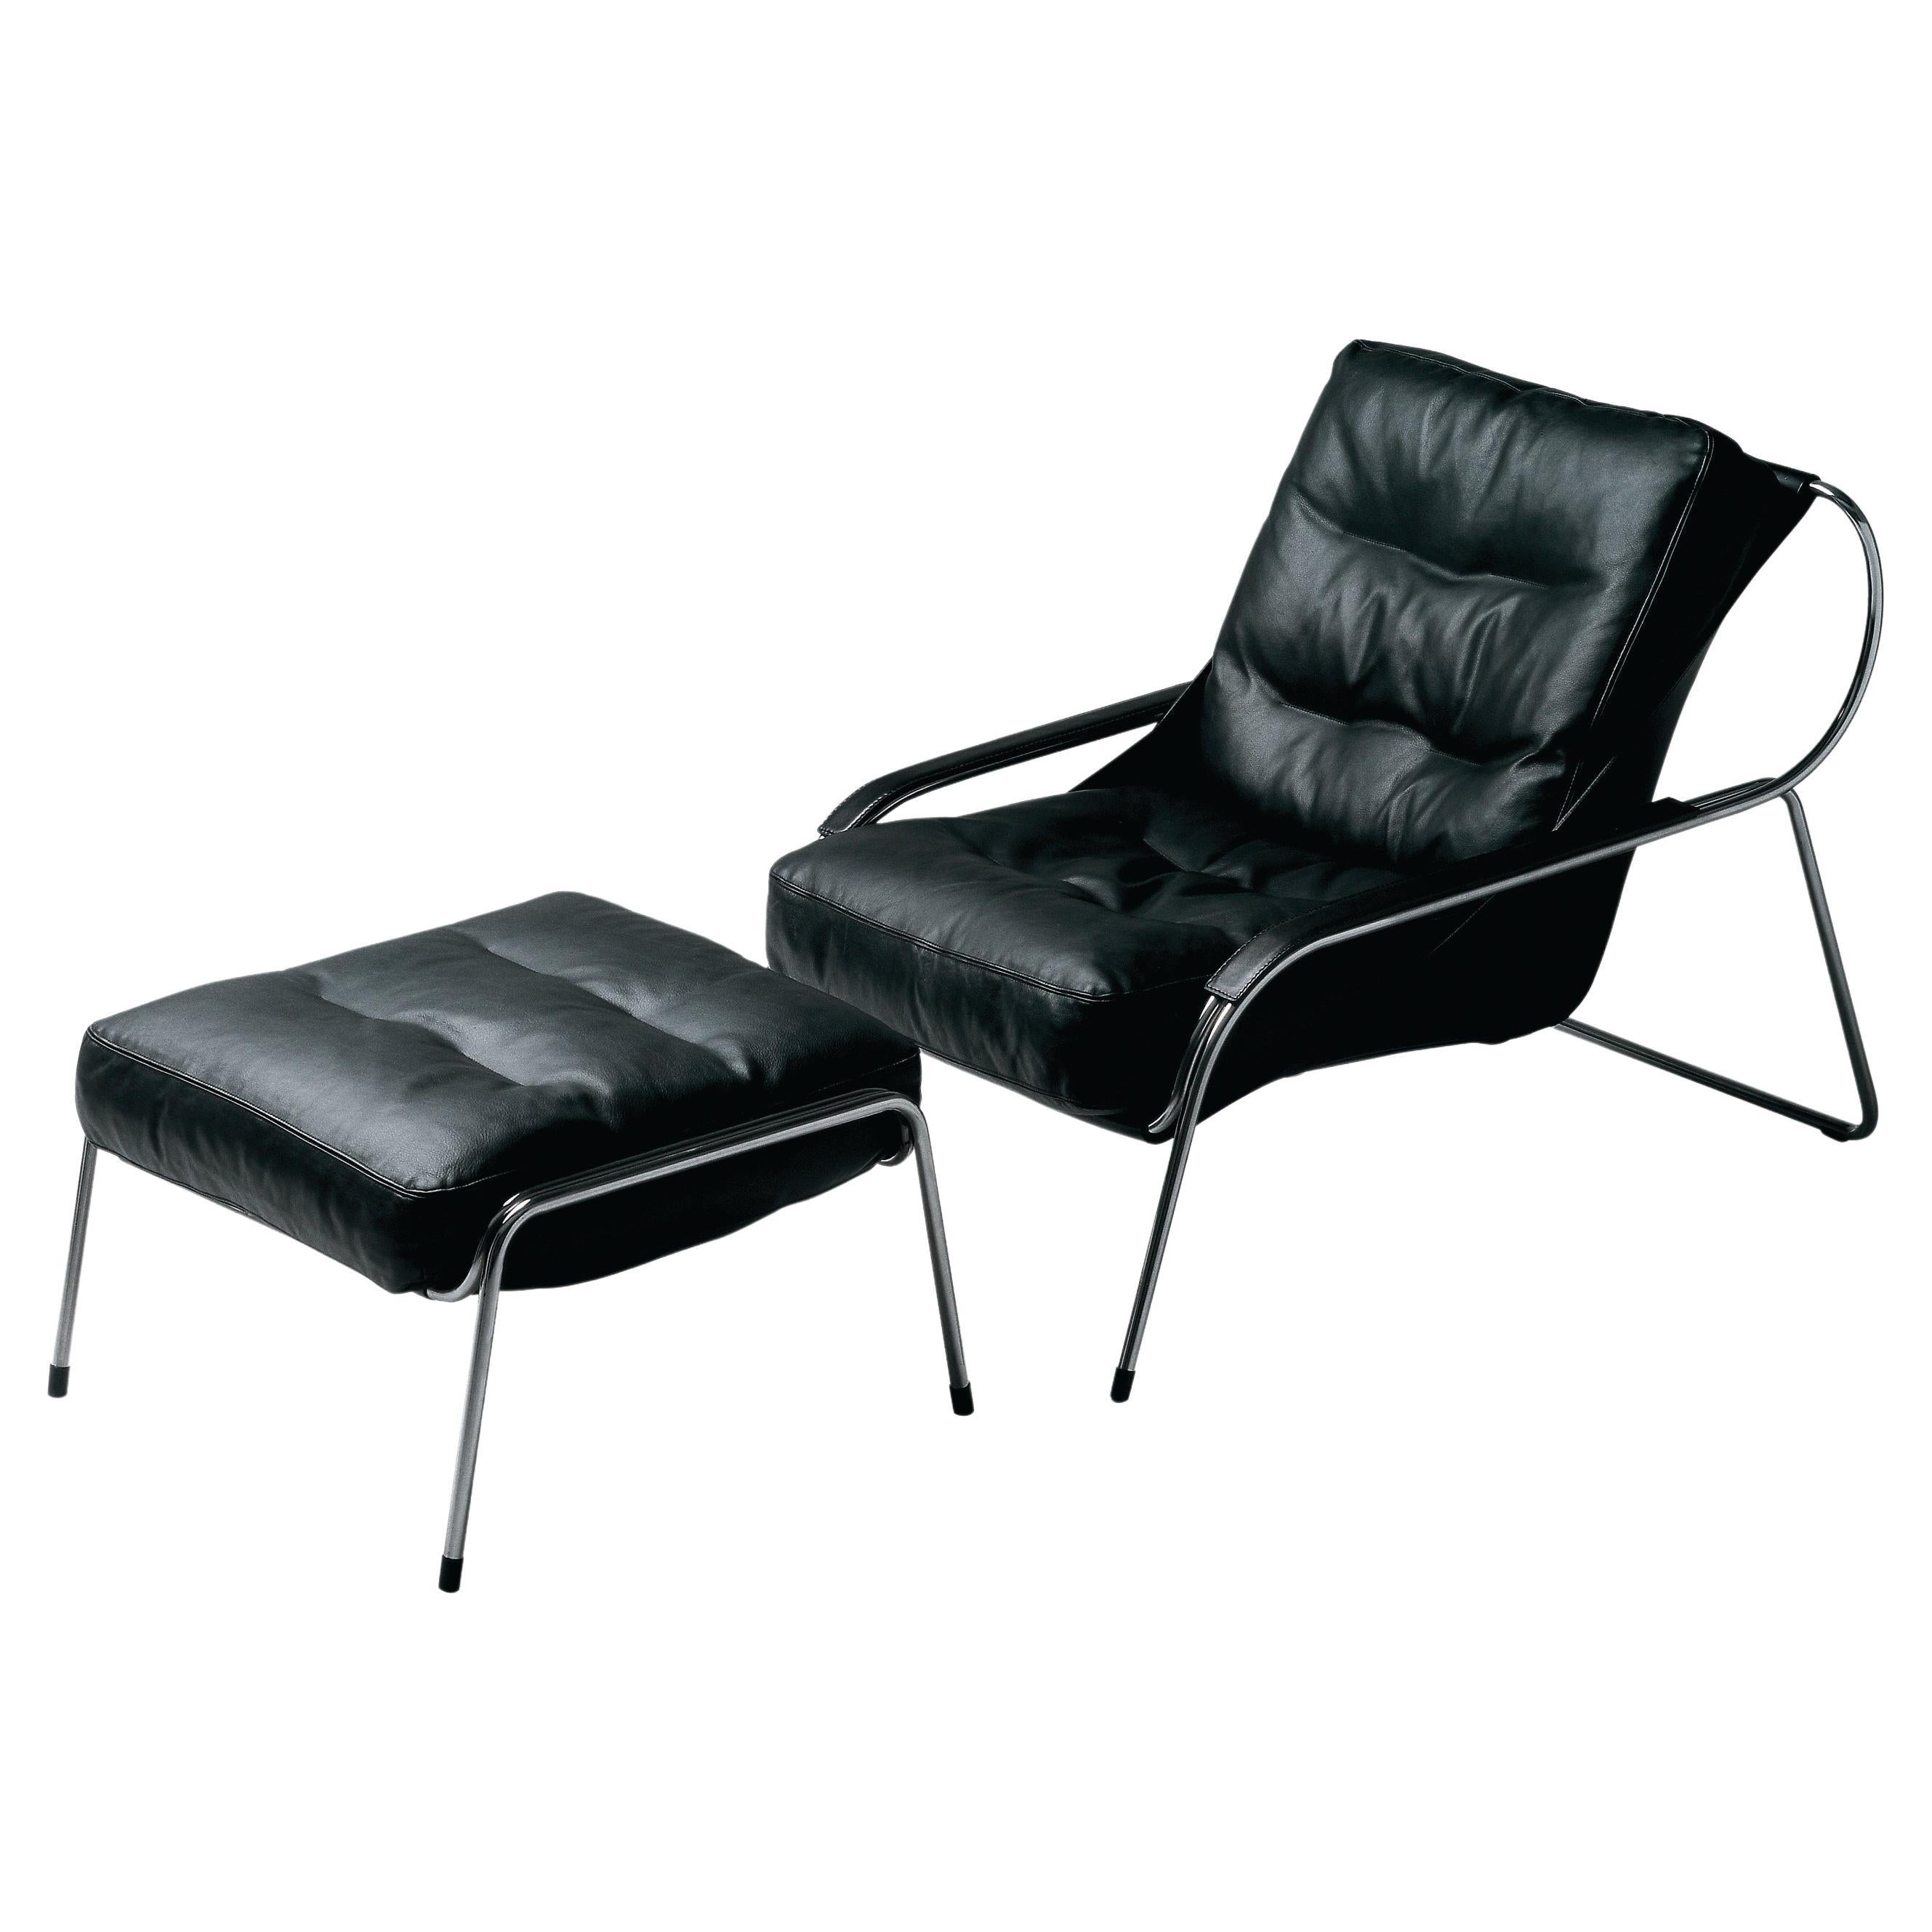 Zanotta Maggiolina Lounge Chair & Pouf in Black Leather and Polished Steel Frame